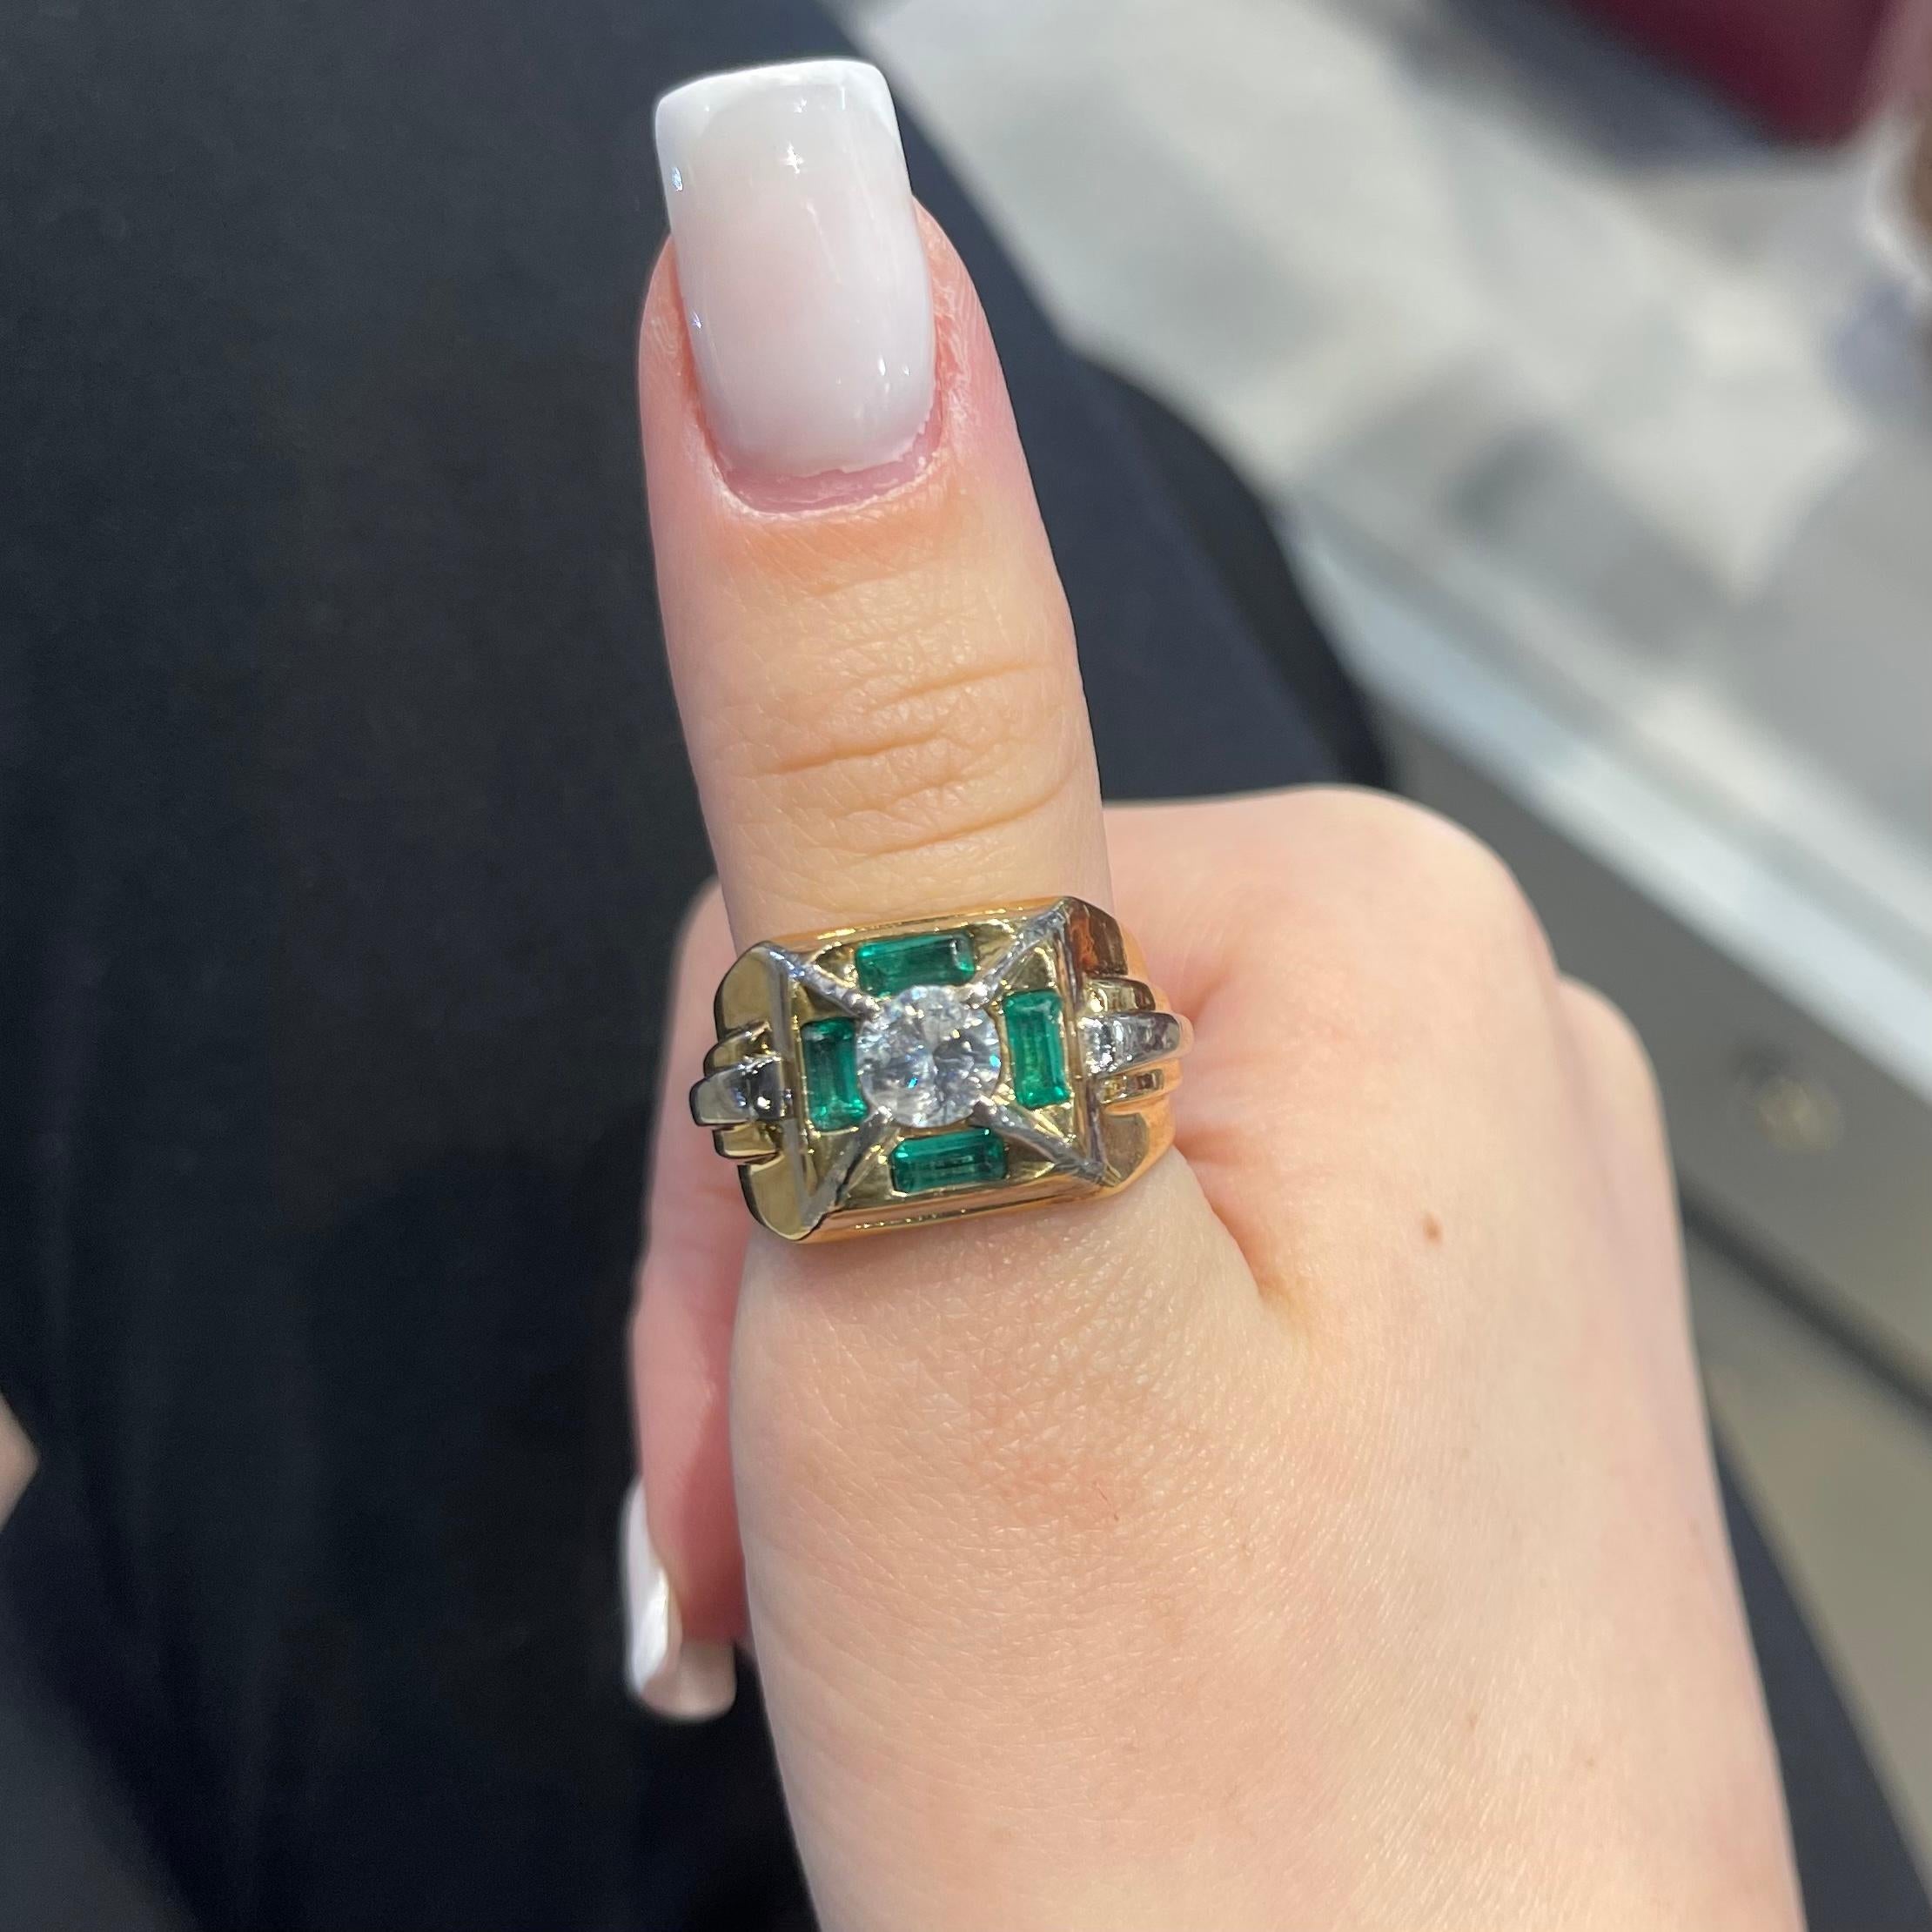 Style: Unisex Large Ring 

Metal: Yellow Gold 

​​​​​​​Stones: Emeralds & Diamond

Emeralds: 4

Diamonds: 1

Diamond Shape: Round

​​​​​​​Total Carat Weight: Approx. 0.8 ct​​​​​​​

Ring Size: 9 (Sizable)

Includes: 24 Month Brilliance Jewels